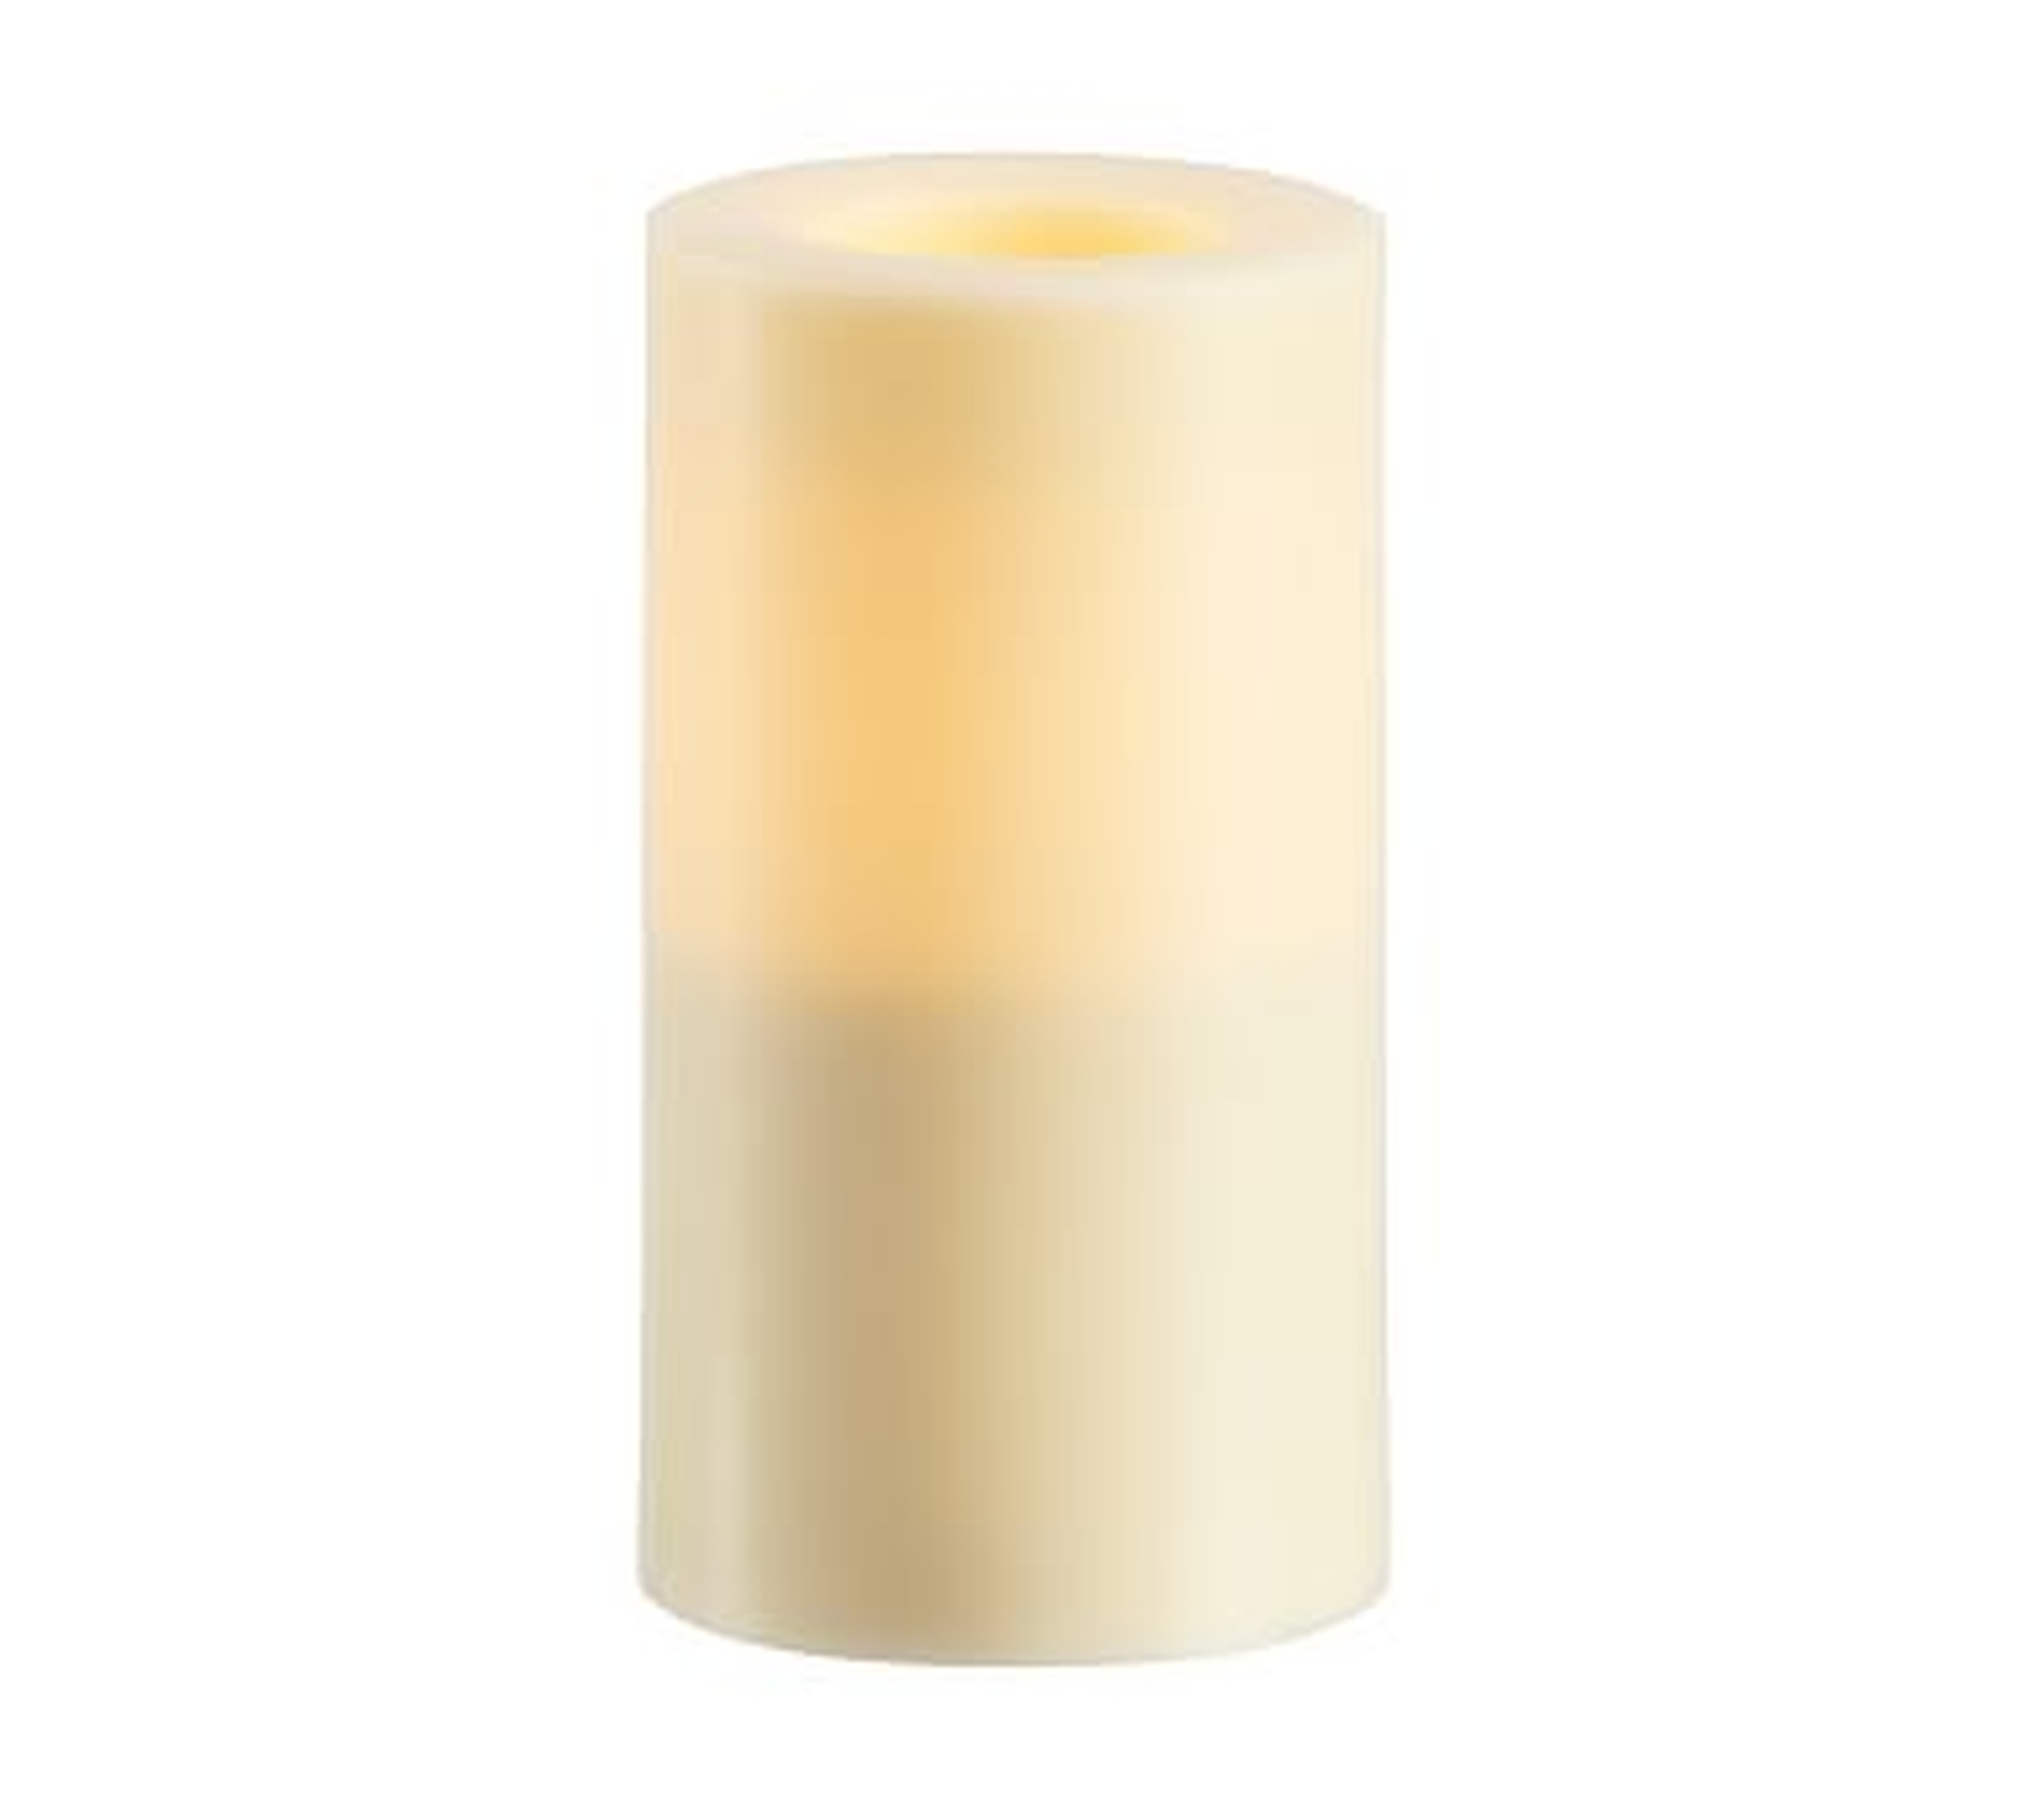 Flameless Outdoor Pillar Candle, Ivory - 3 x 6" - Pottery Barn